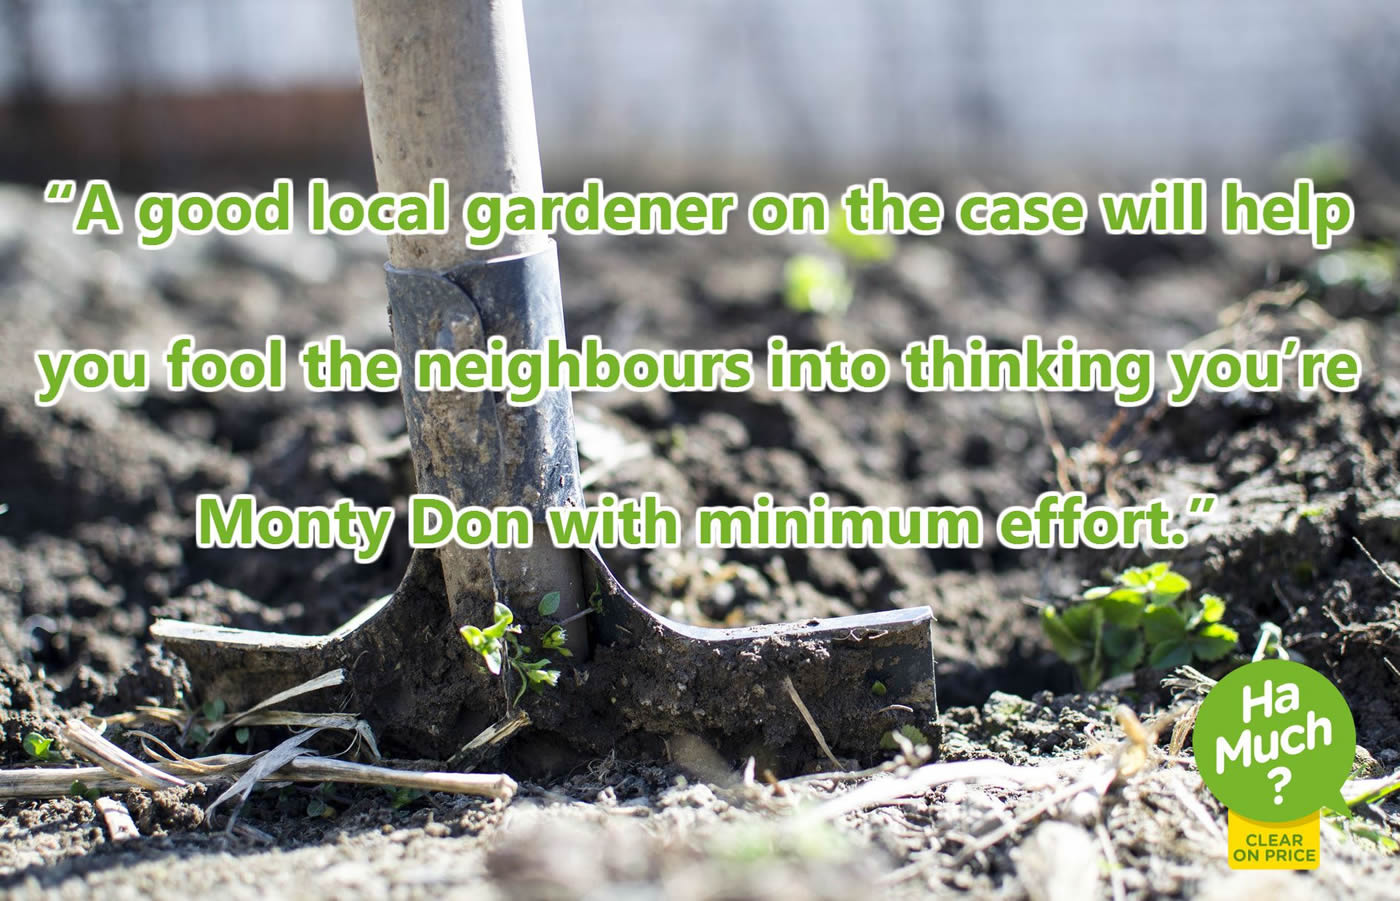 A good local gardener on the case will help you fool the neighbour into thinking you're Monty Don with minimum effort